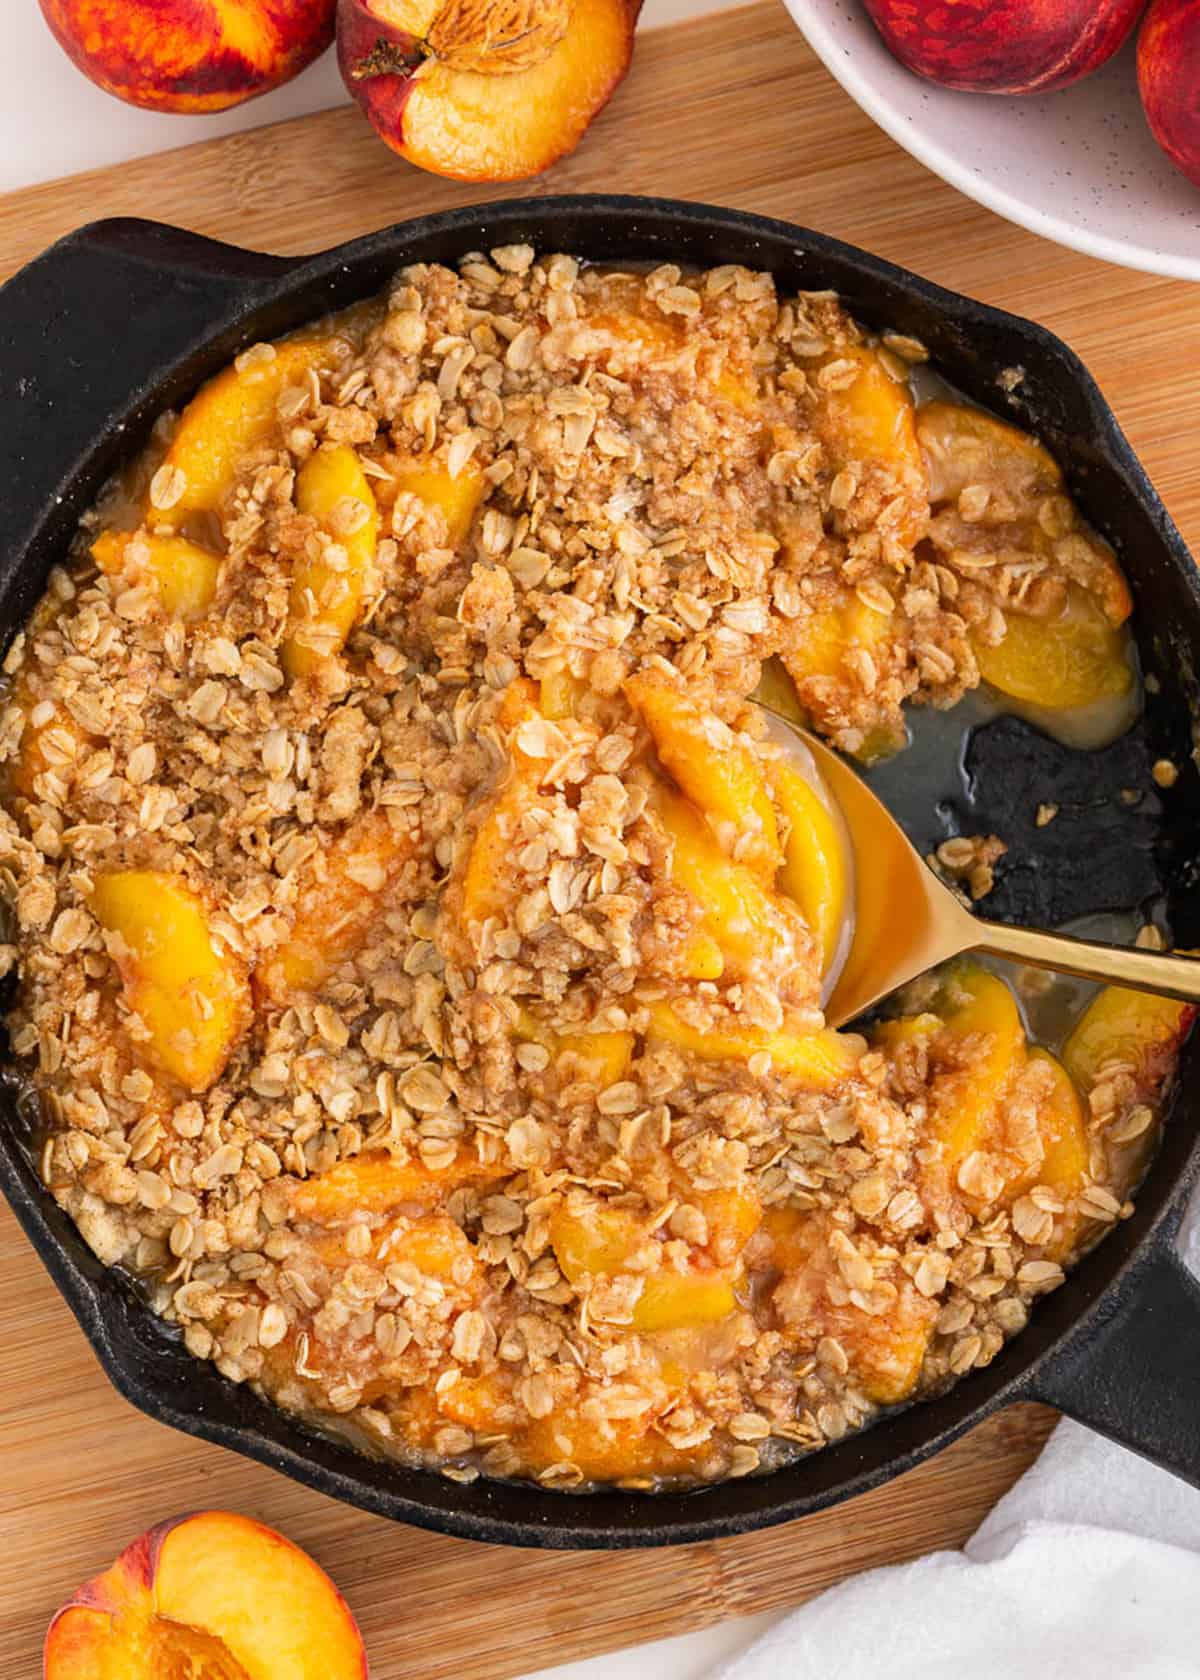 Peach crisp cooked in a iron skillet.